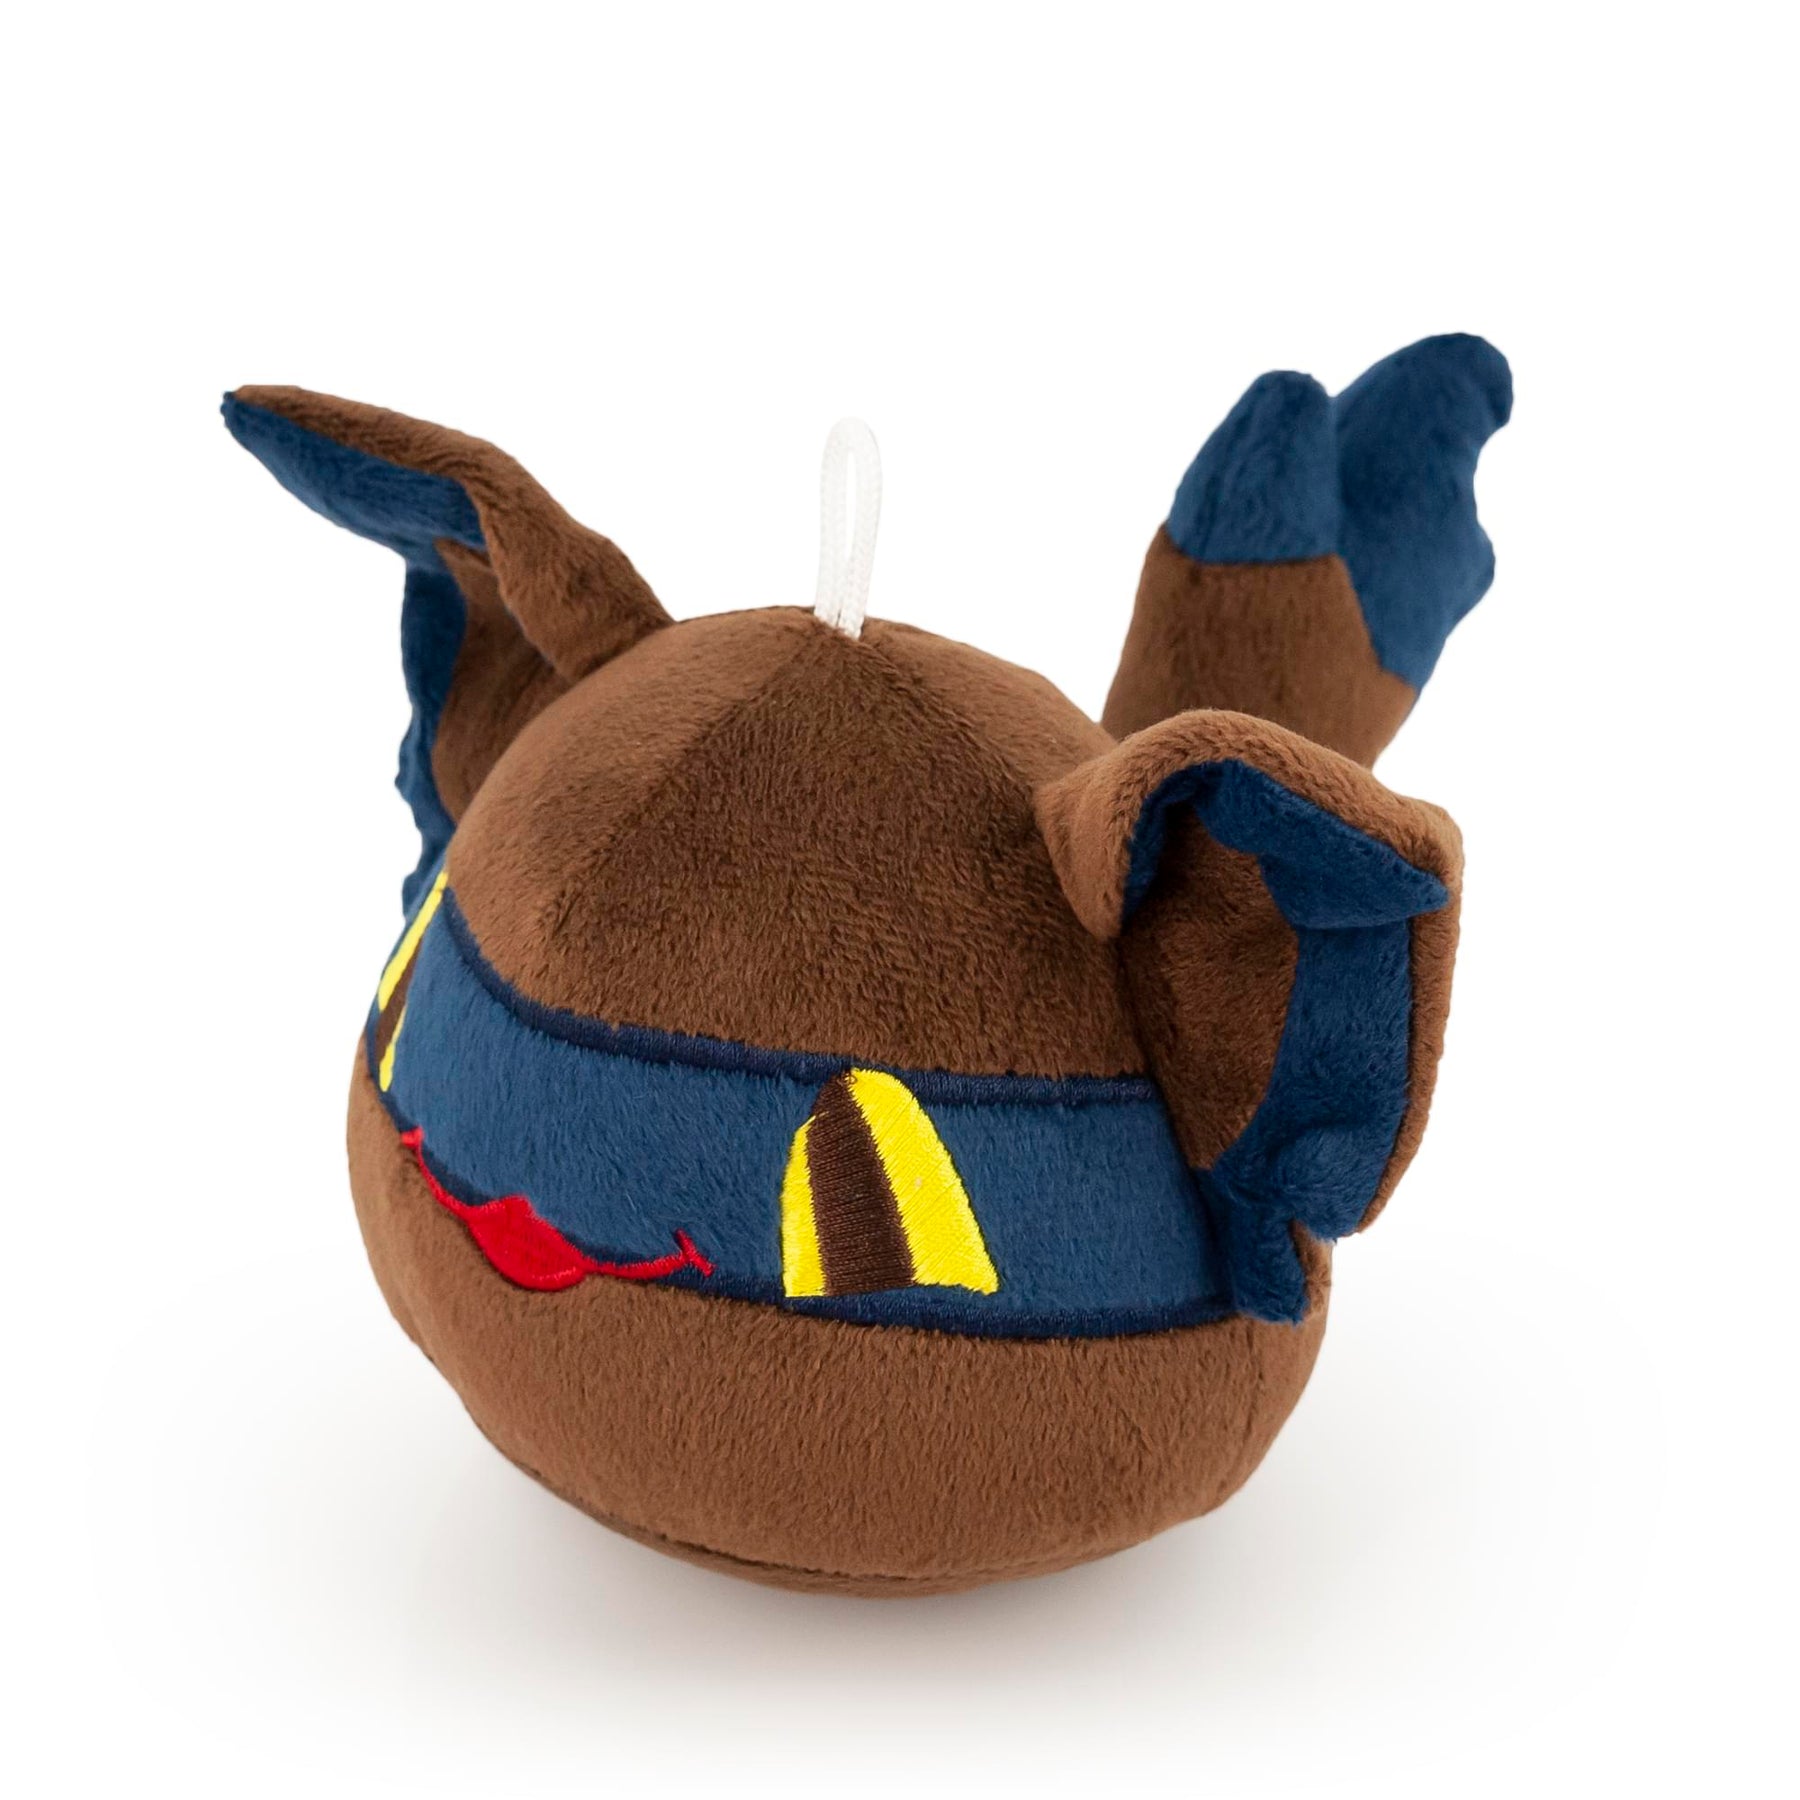 Slime Rancher Plush Toy Bean Bag Plushie | Hunter Slime, by Imaginary People